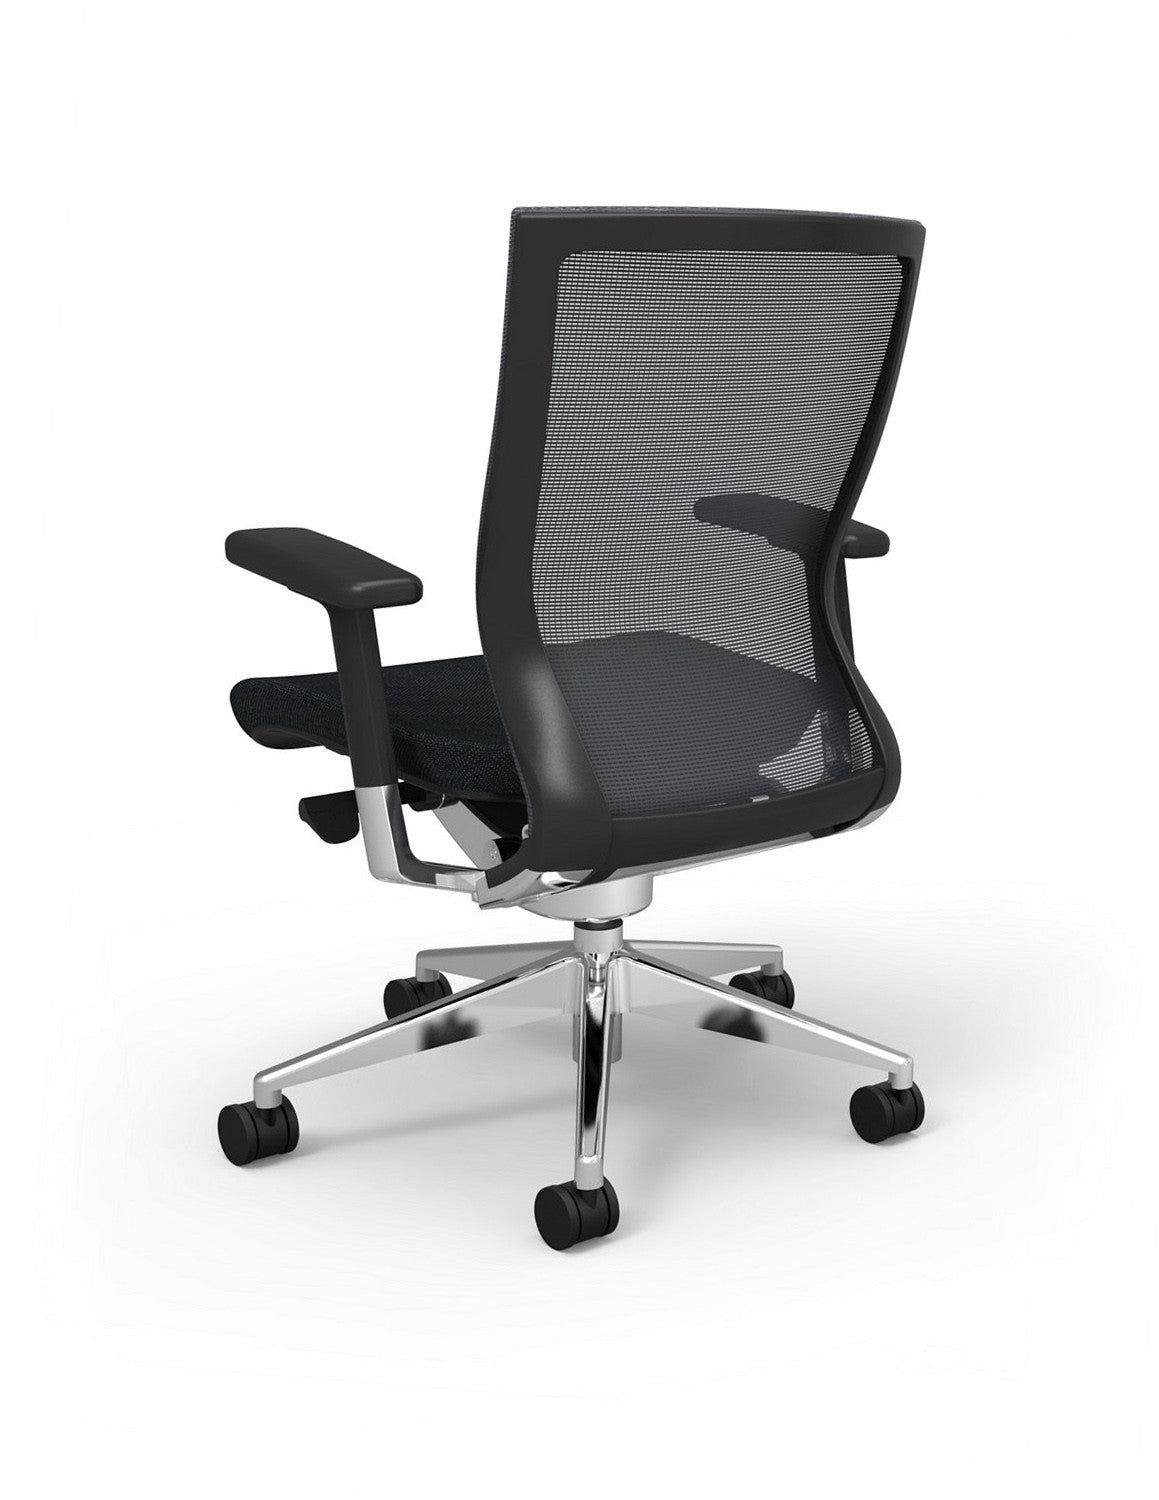 Blanco Office Chair with Black Seat Option